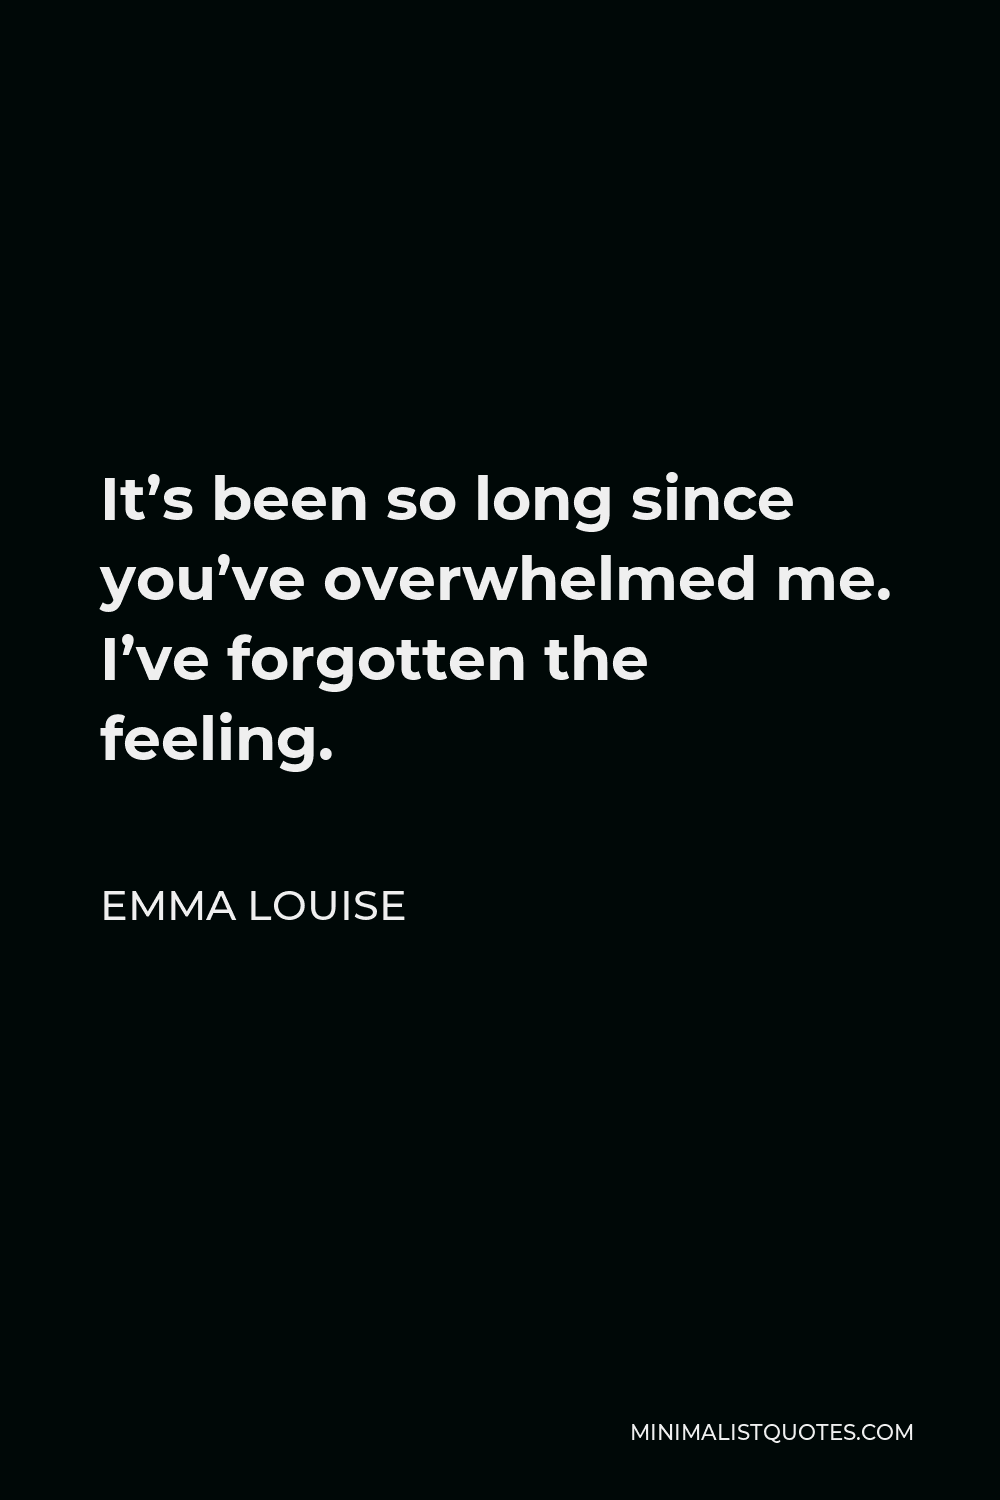 Emma Louise Quote - It’s been so long since you’ve overwhelmed me. I’ve forgotten the feeling.